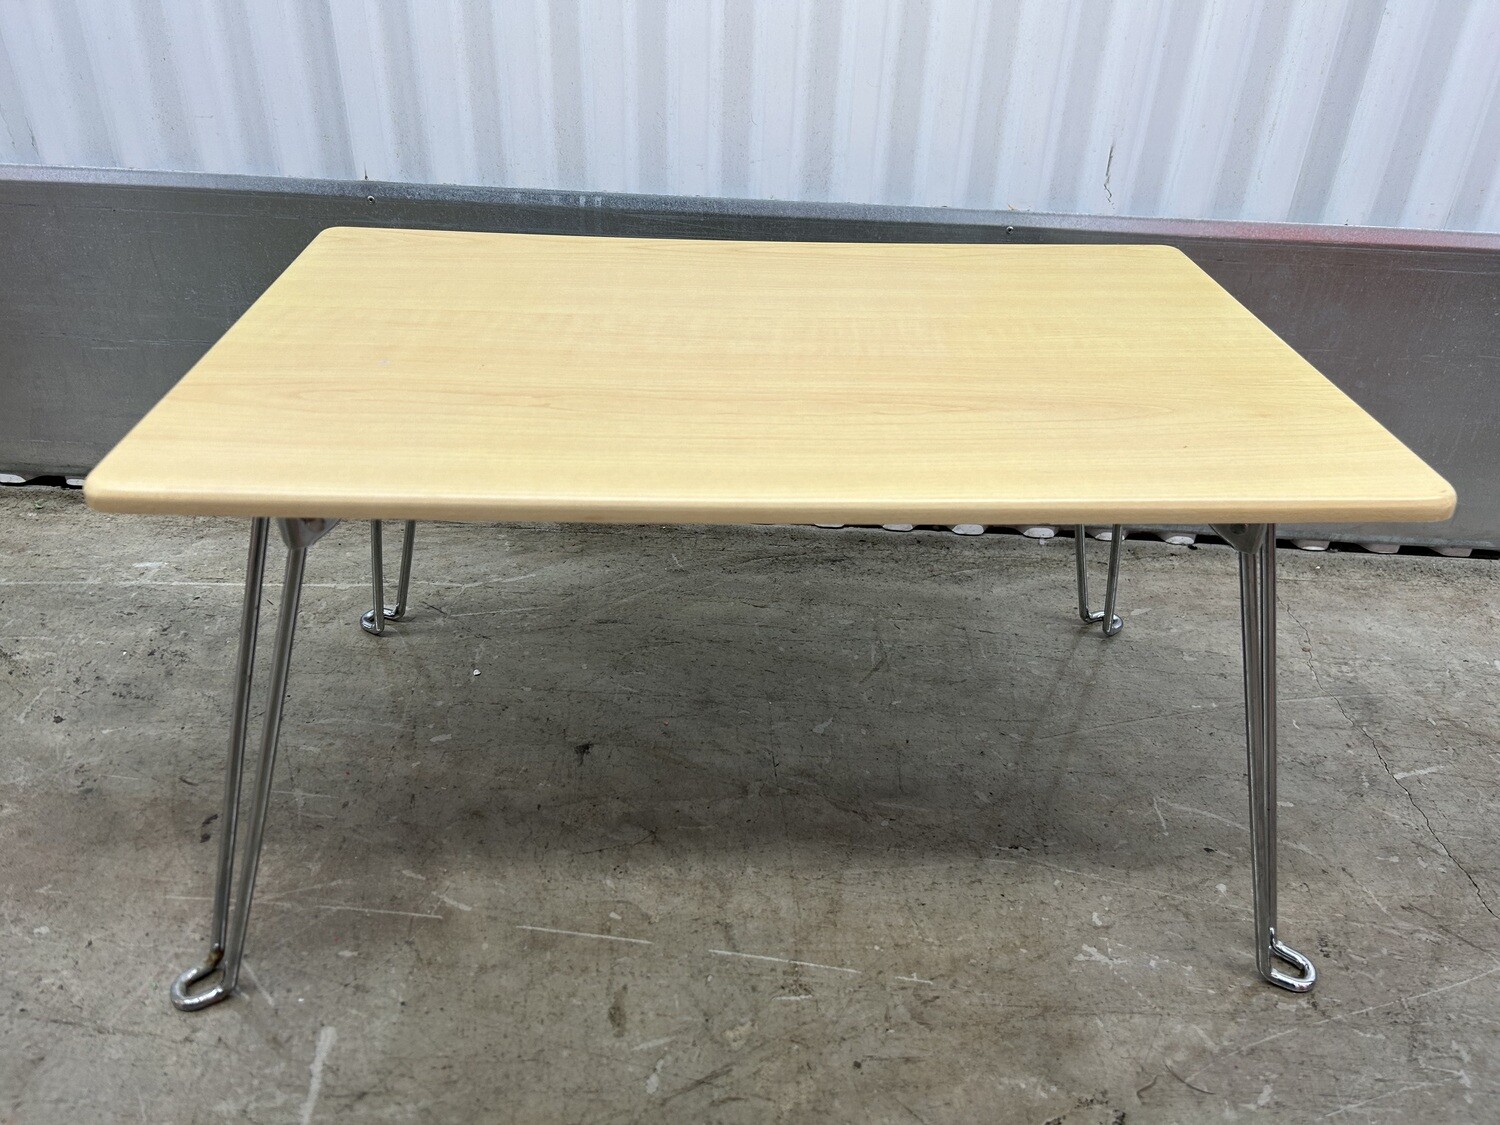 MCM-look Table, 13" high #2133